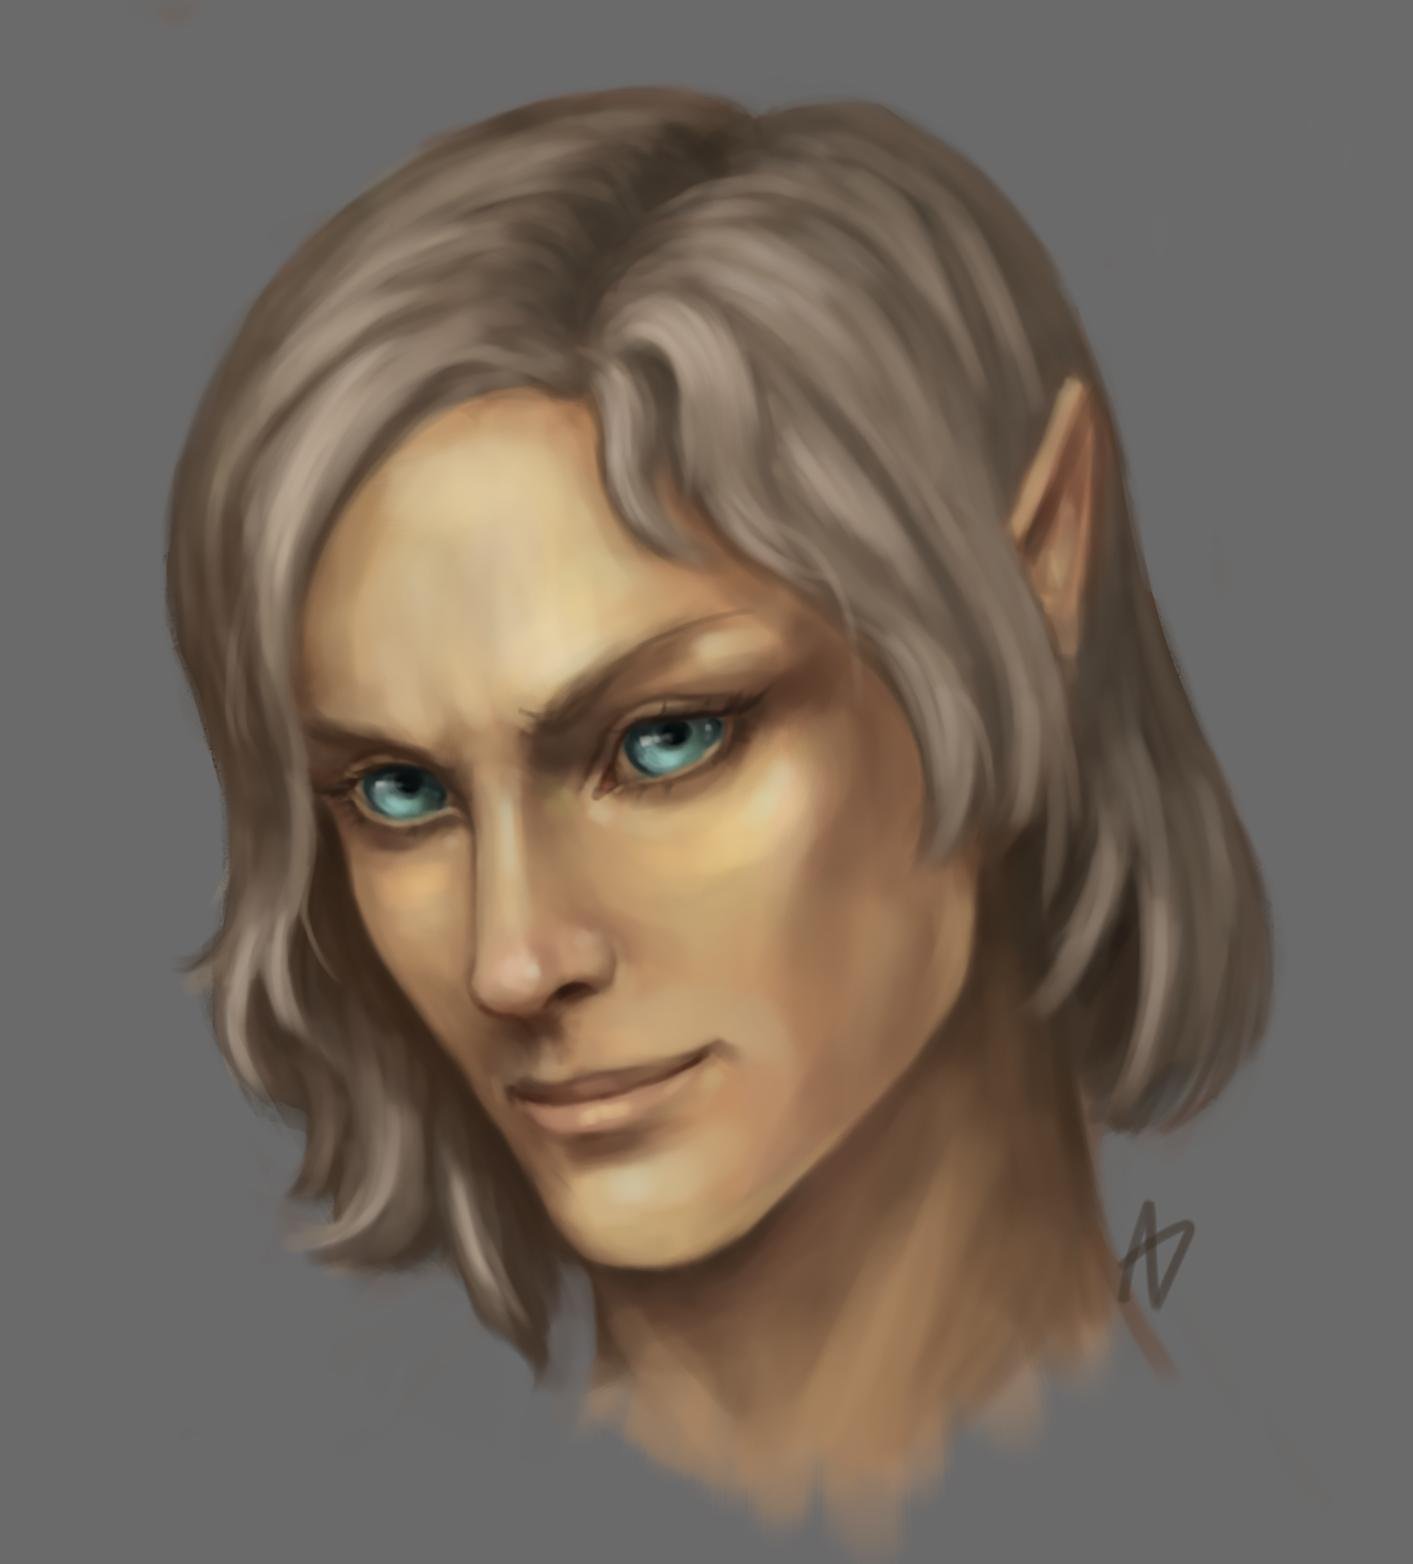 Freelance artist, TES, WoW, FF14 universes. Only art/game stuff here. @aerwindale.bsky.social